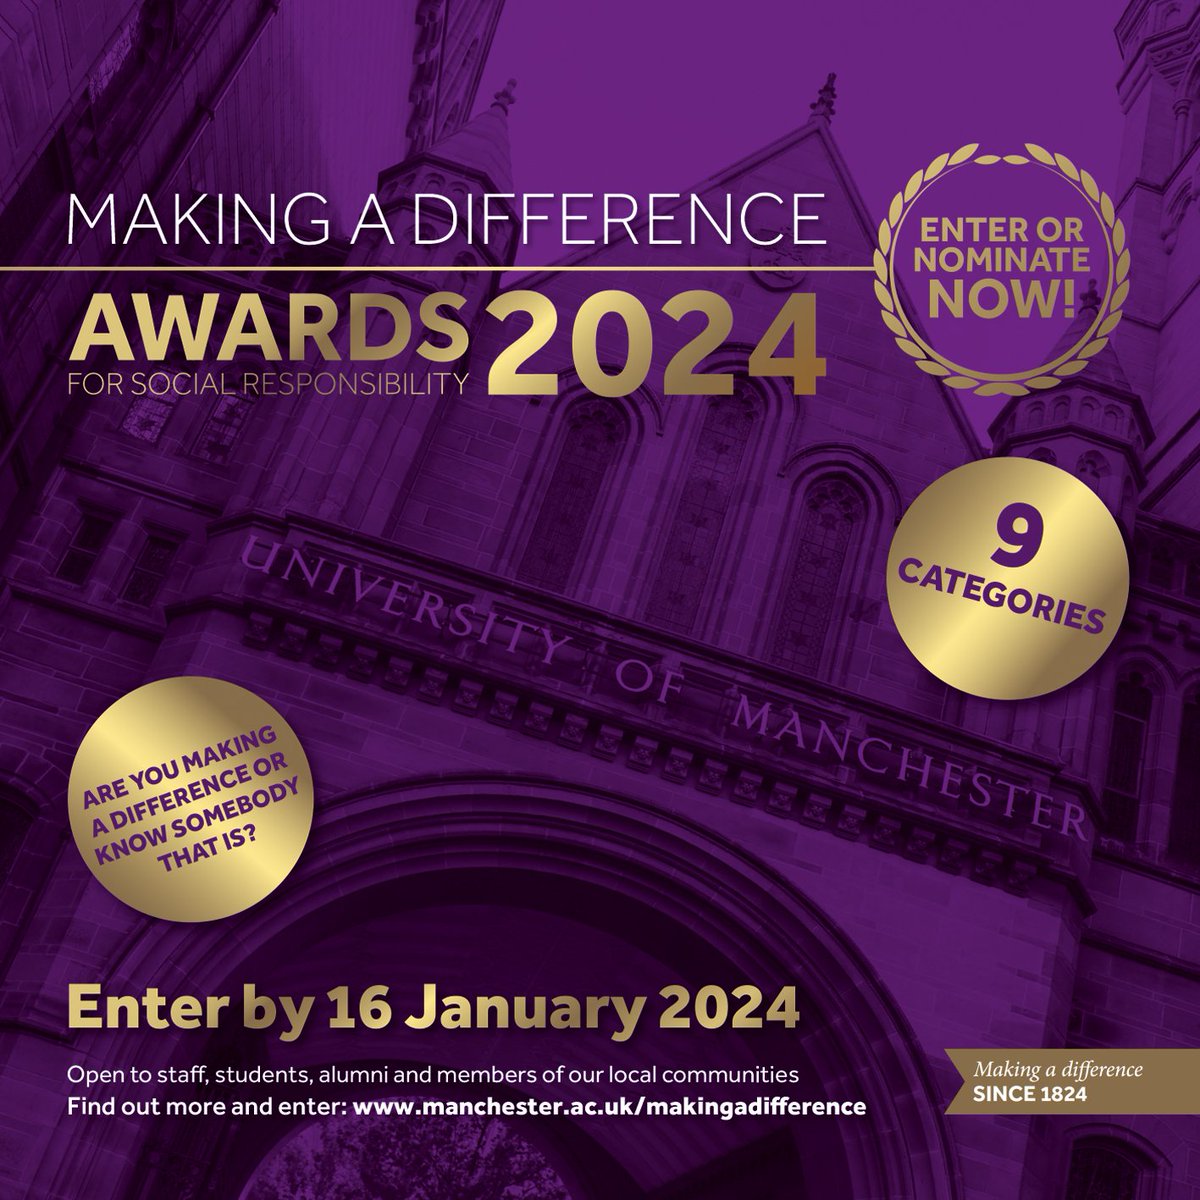 We are excited to announce that our annual Making a Difference Awards are now OPEN for entries and nominations! We want to hear from all our changemakers. So enter the #MaDAwards now! 🎉⭐️   socialresponsibility.manchester.ac.uk/get-involved/a…  @OfficialUoM @SocialResponUoM